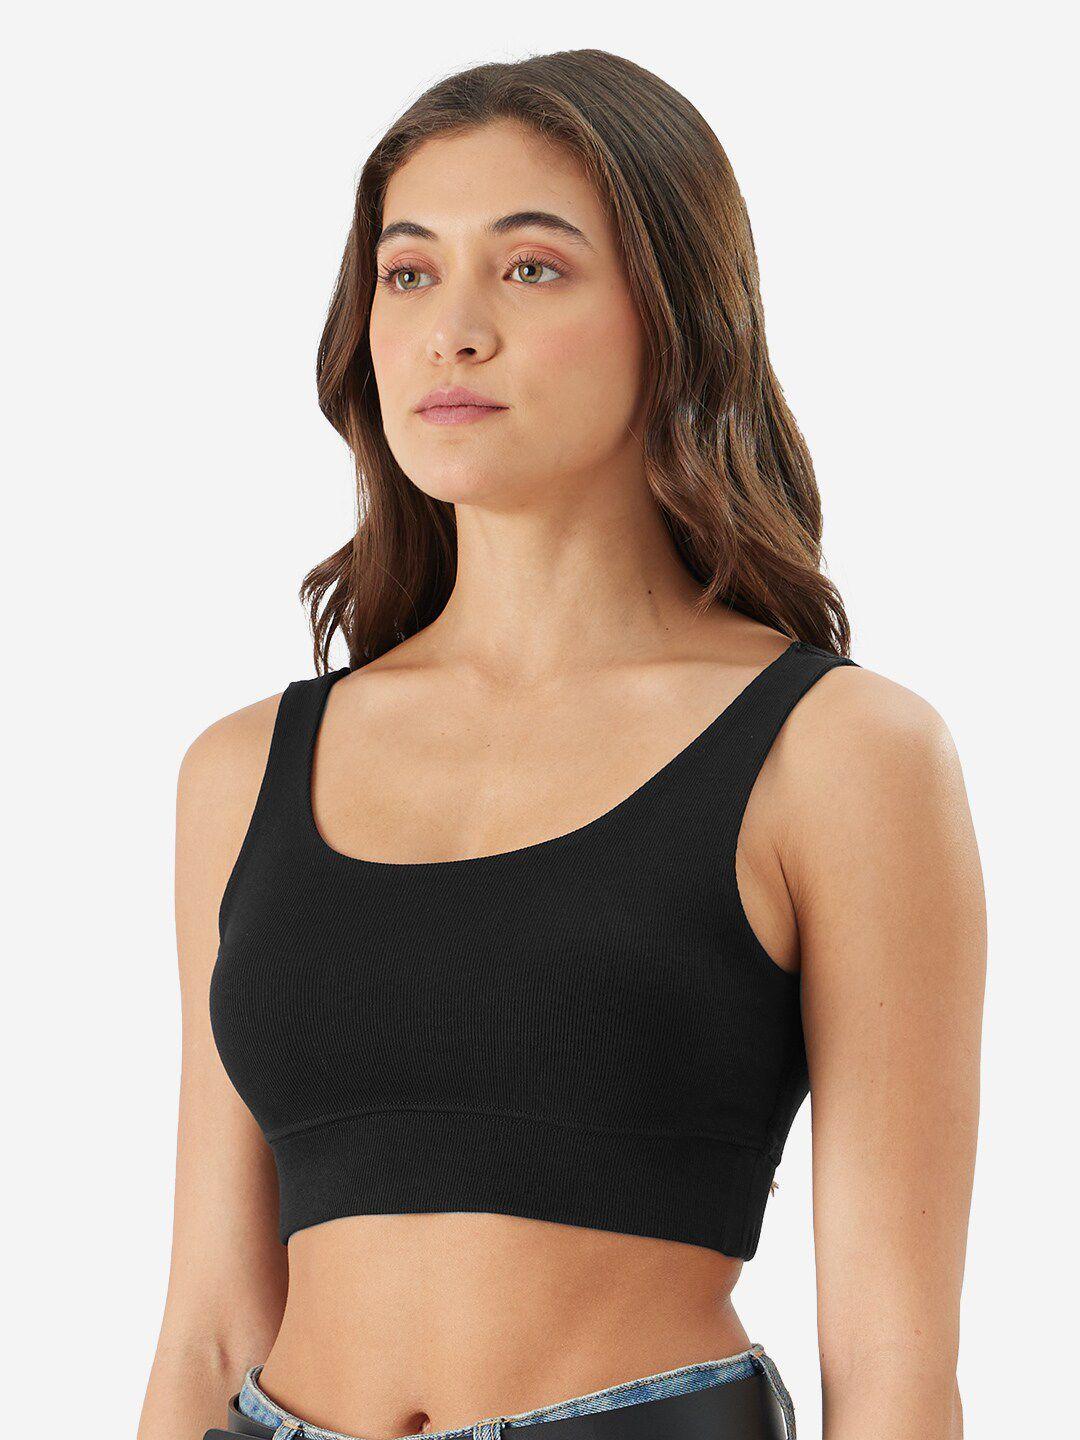 the souled store black full coverage underwired cotton bralette bra all day comfort